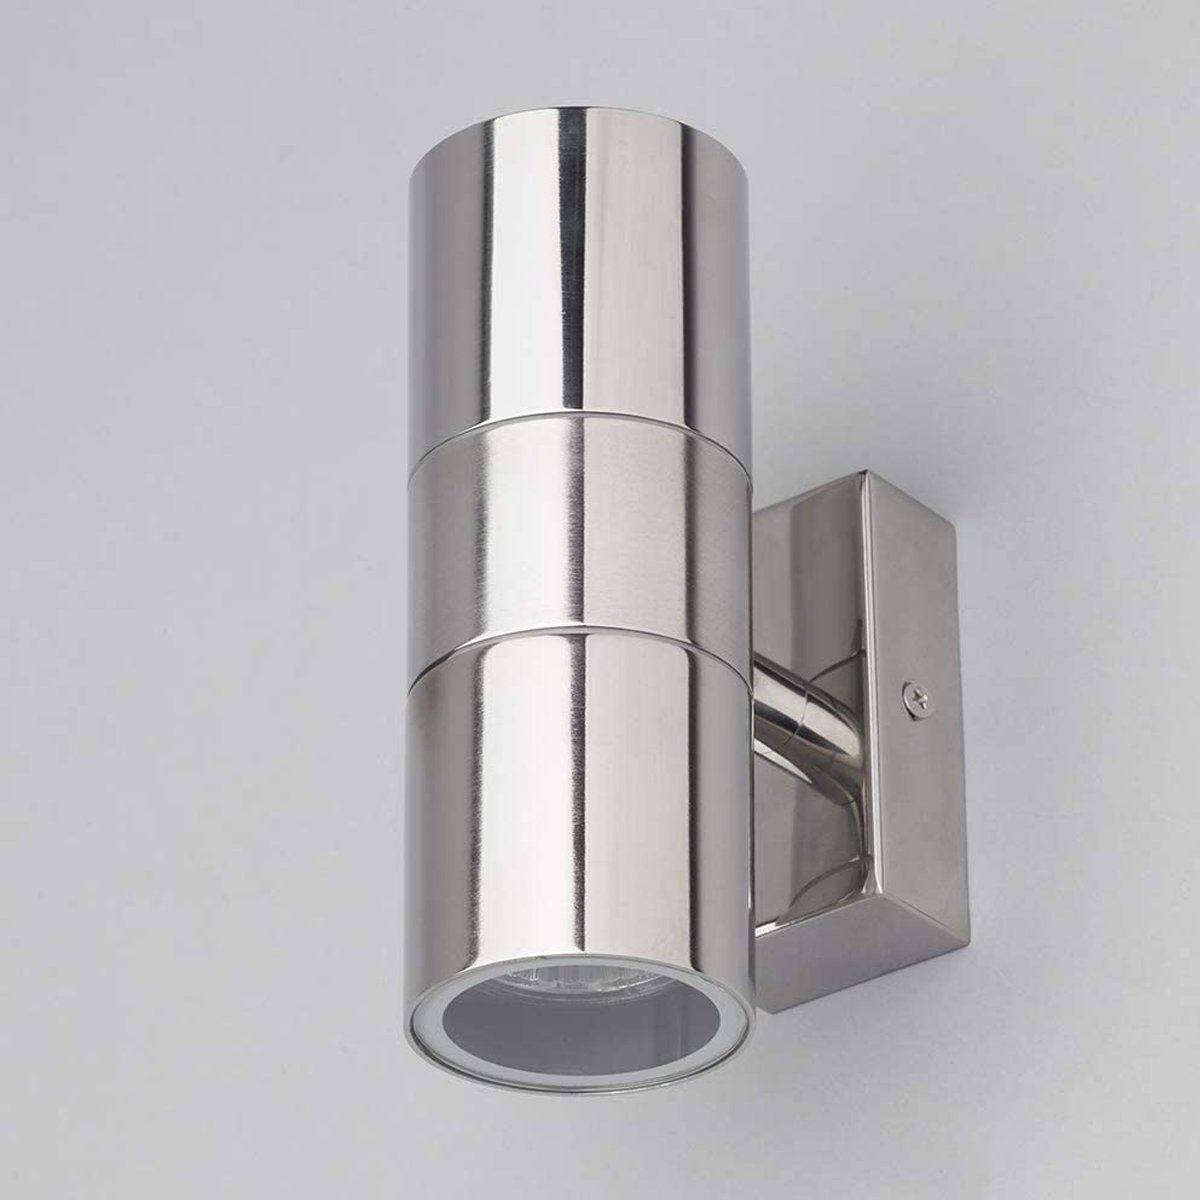 CGC GLORY Polished Stainless Steel Double Wall Light Spotlight